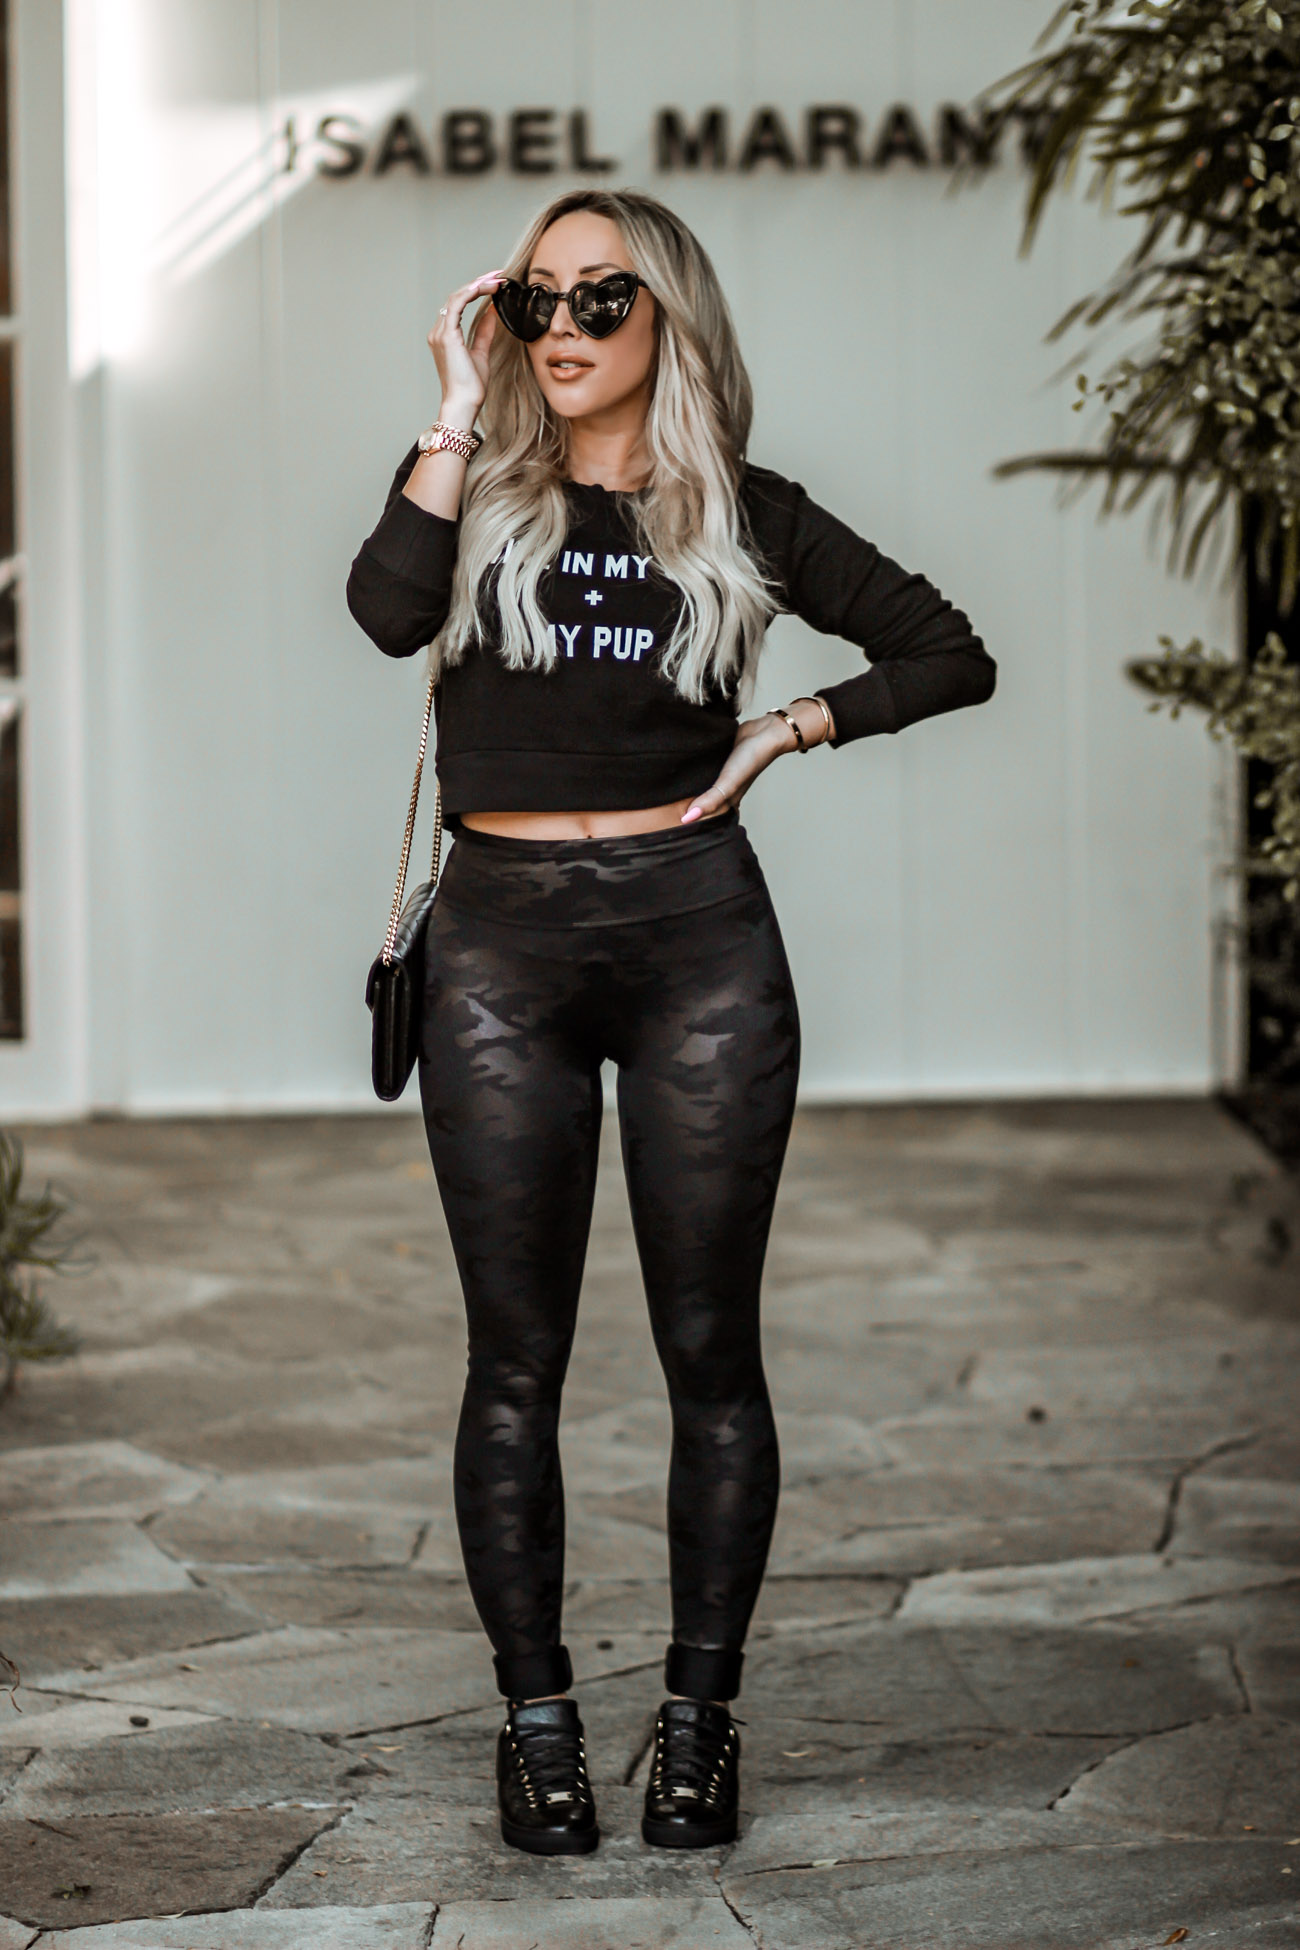 Wine in My Cup + My Pup | Wildfox tee's | Wildfox Couture | Balenciaga Sneakers  |  Black Camo Leggings  |  Blondie in the City by Hayley Larue